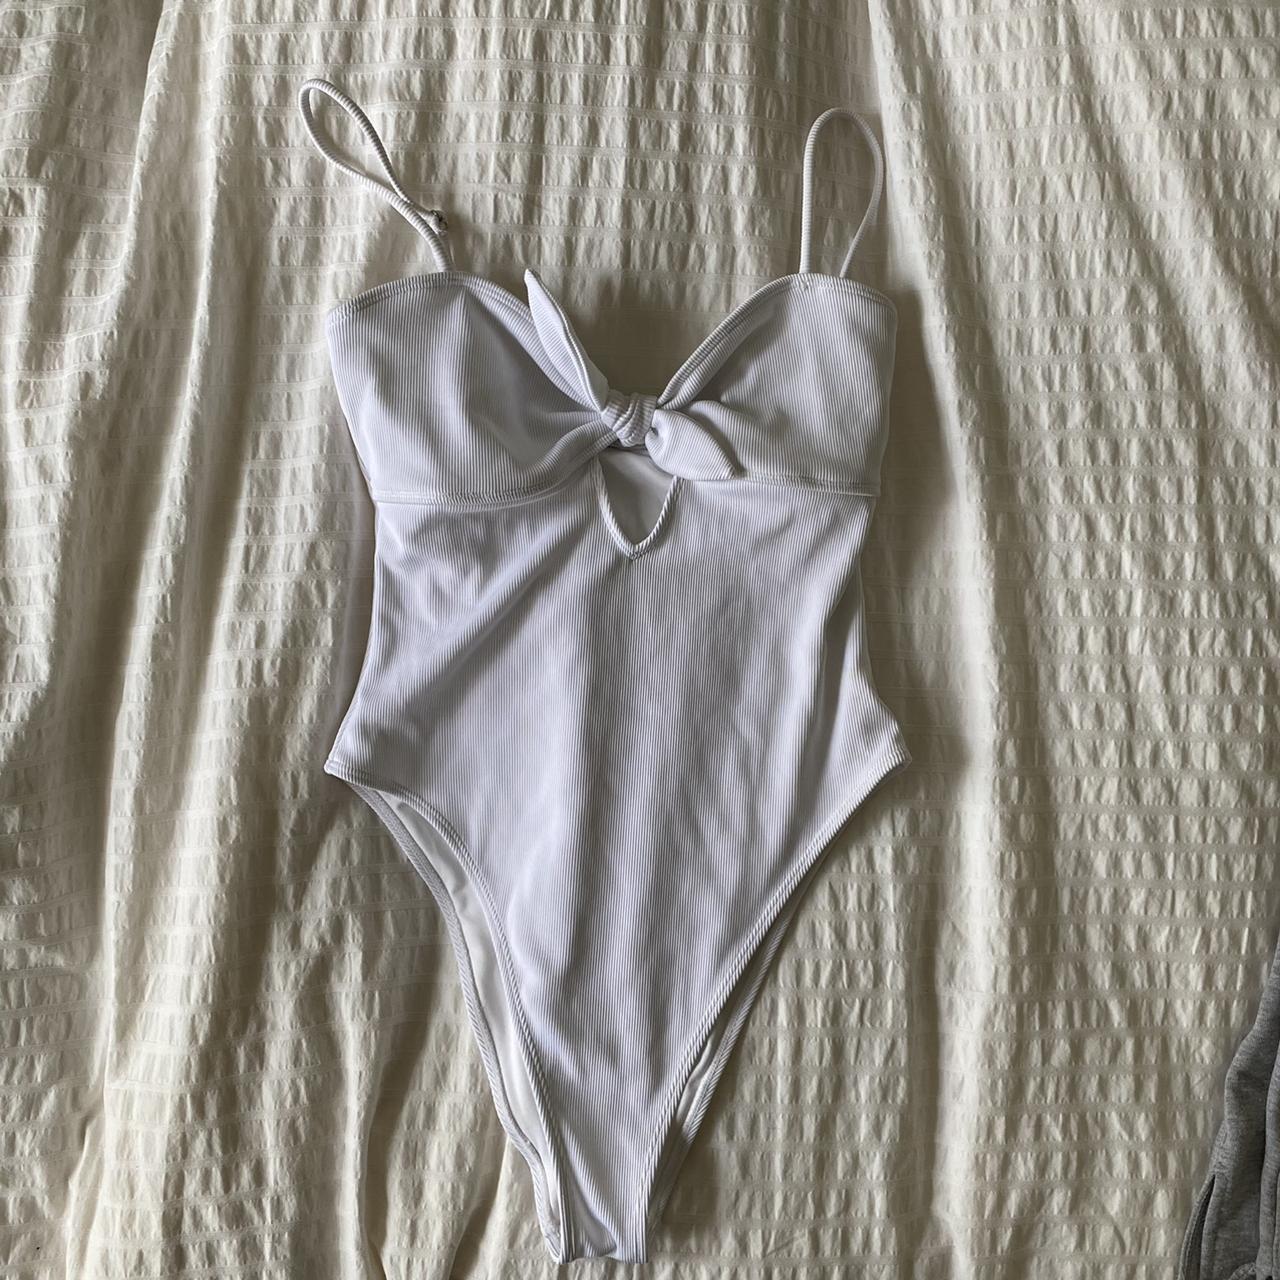 white one piece swimsuit ☁️ Perfect for insta... - Depop